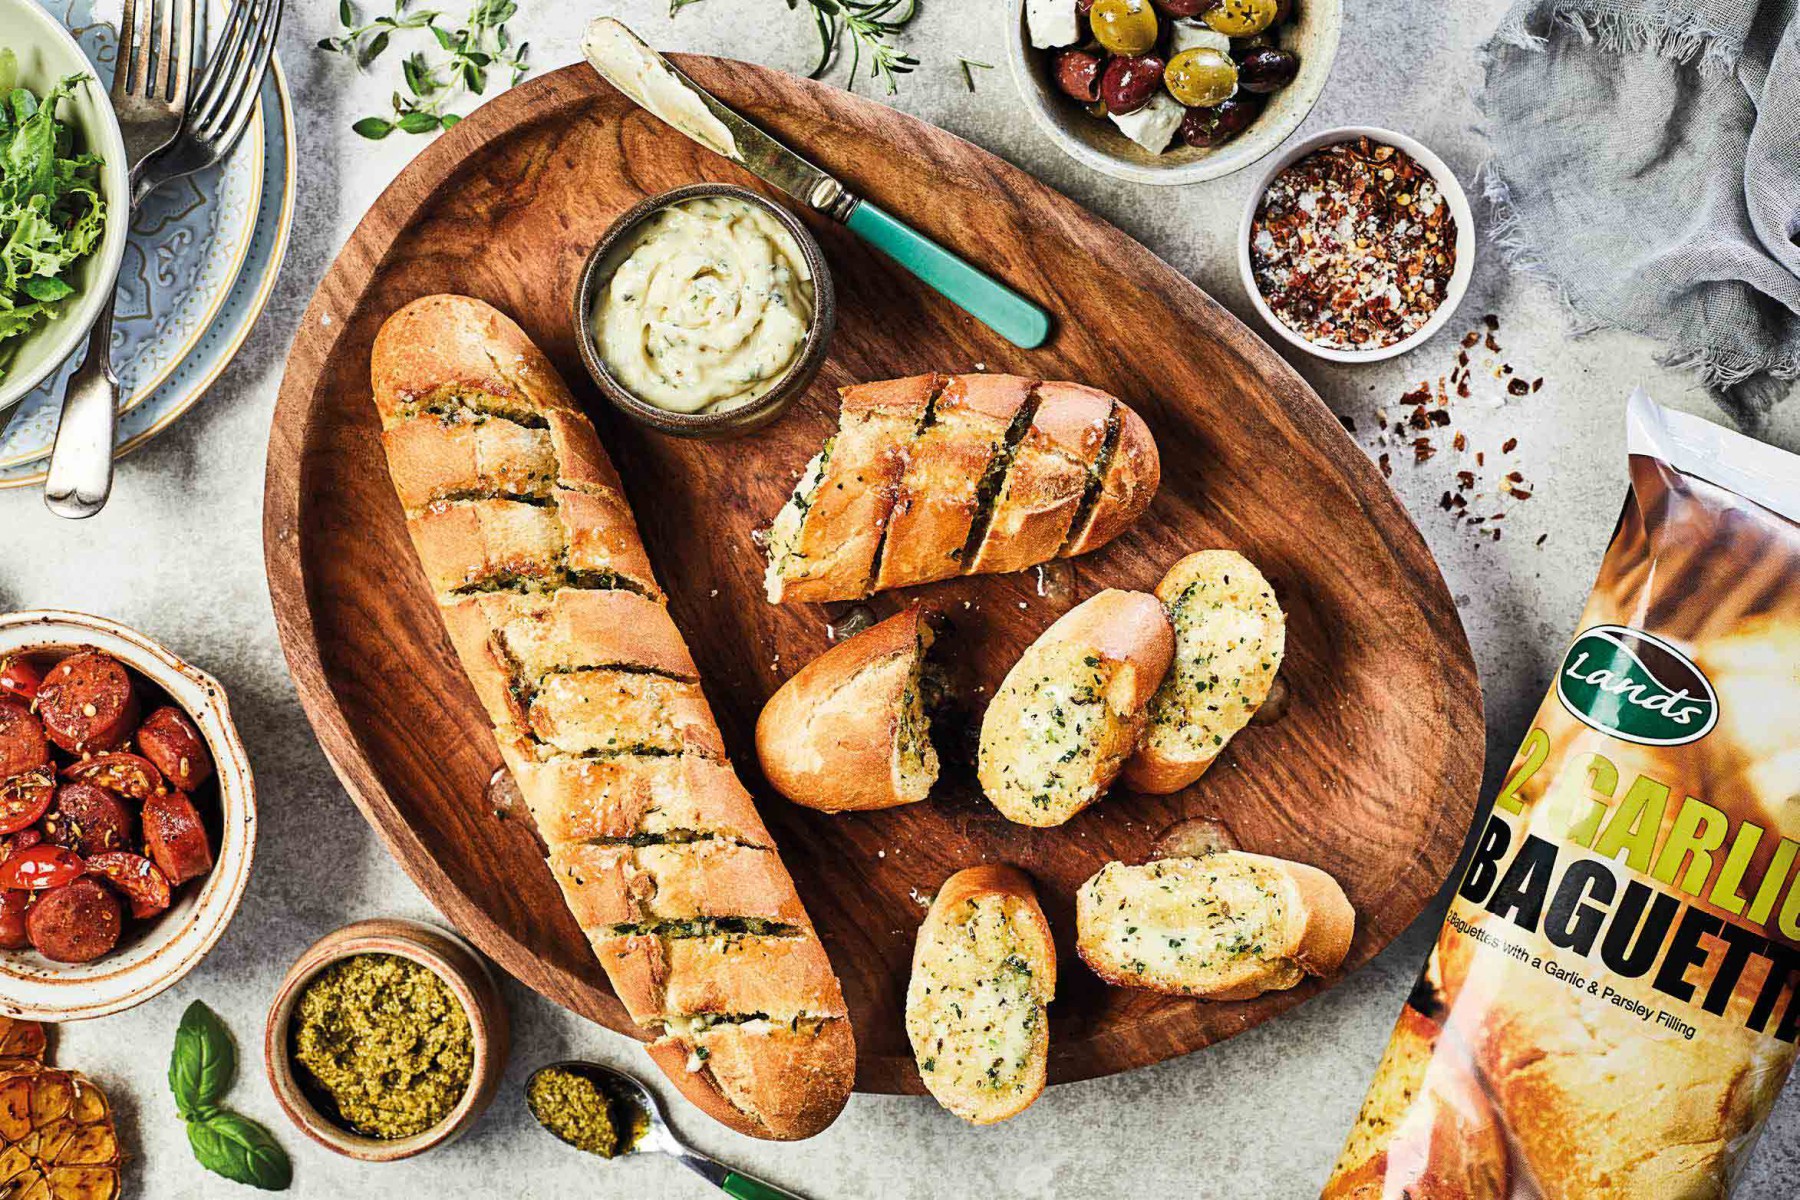 Garlic baguettes with dips